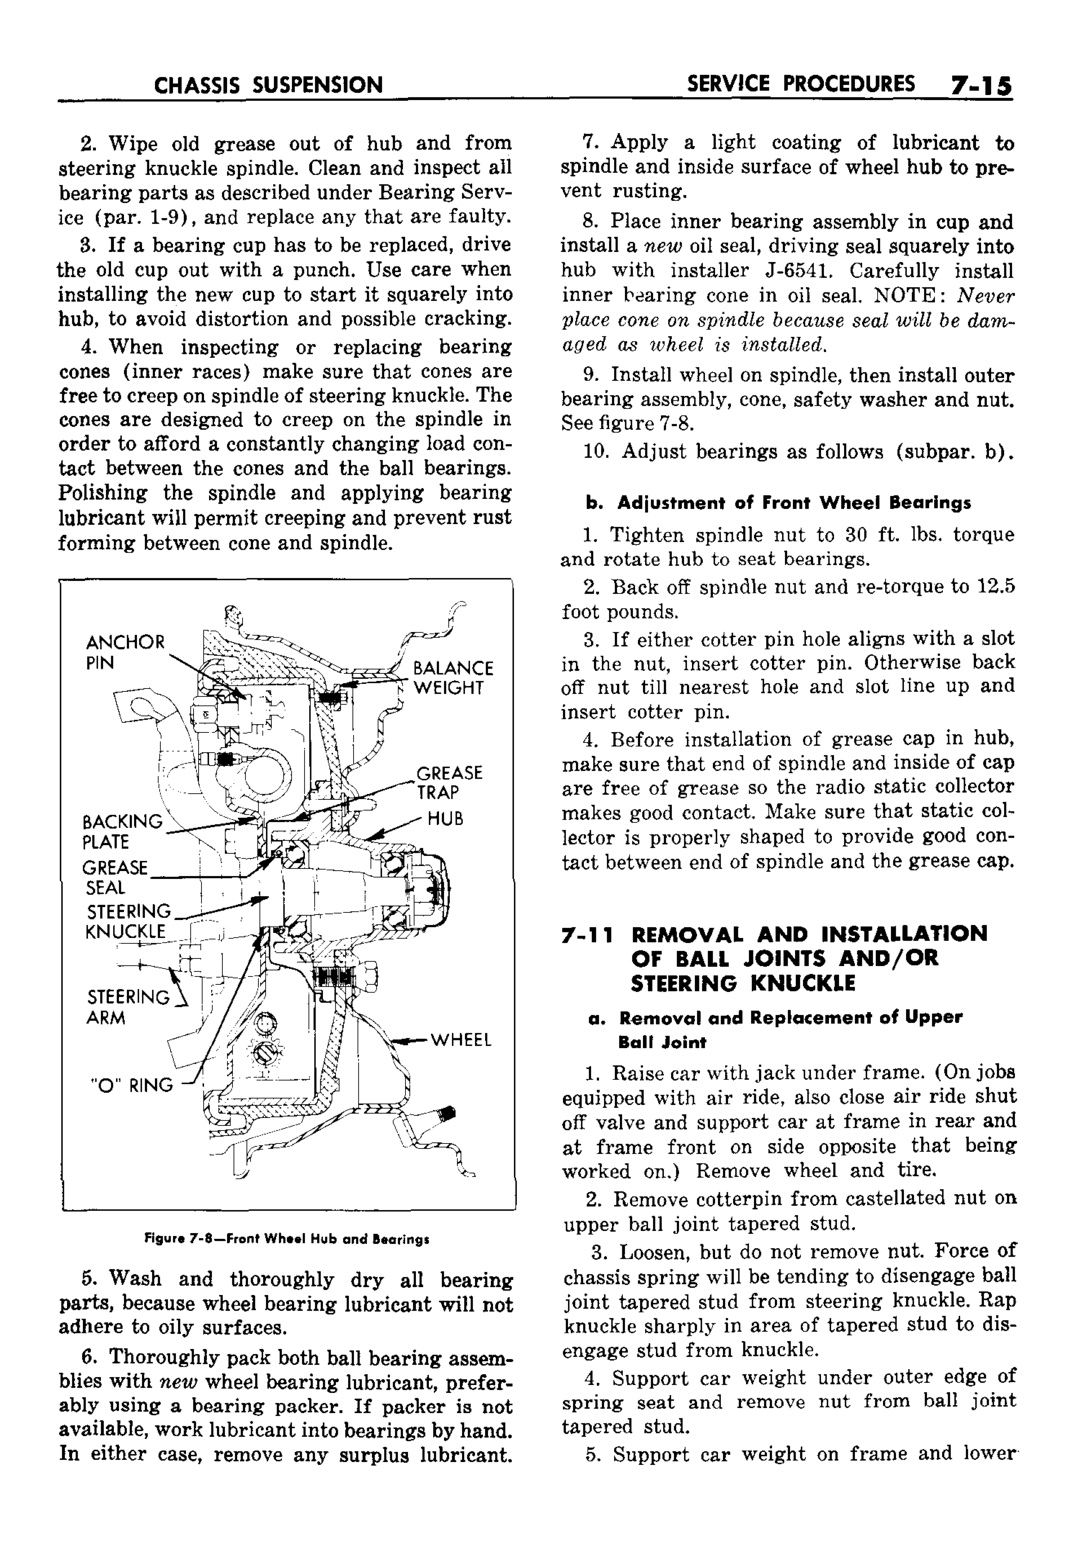 n_08 1959 Buick Shop Manual - Chassis Suspension-015-015.jpg